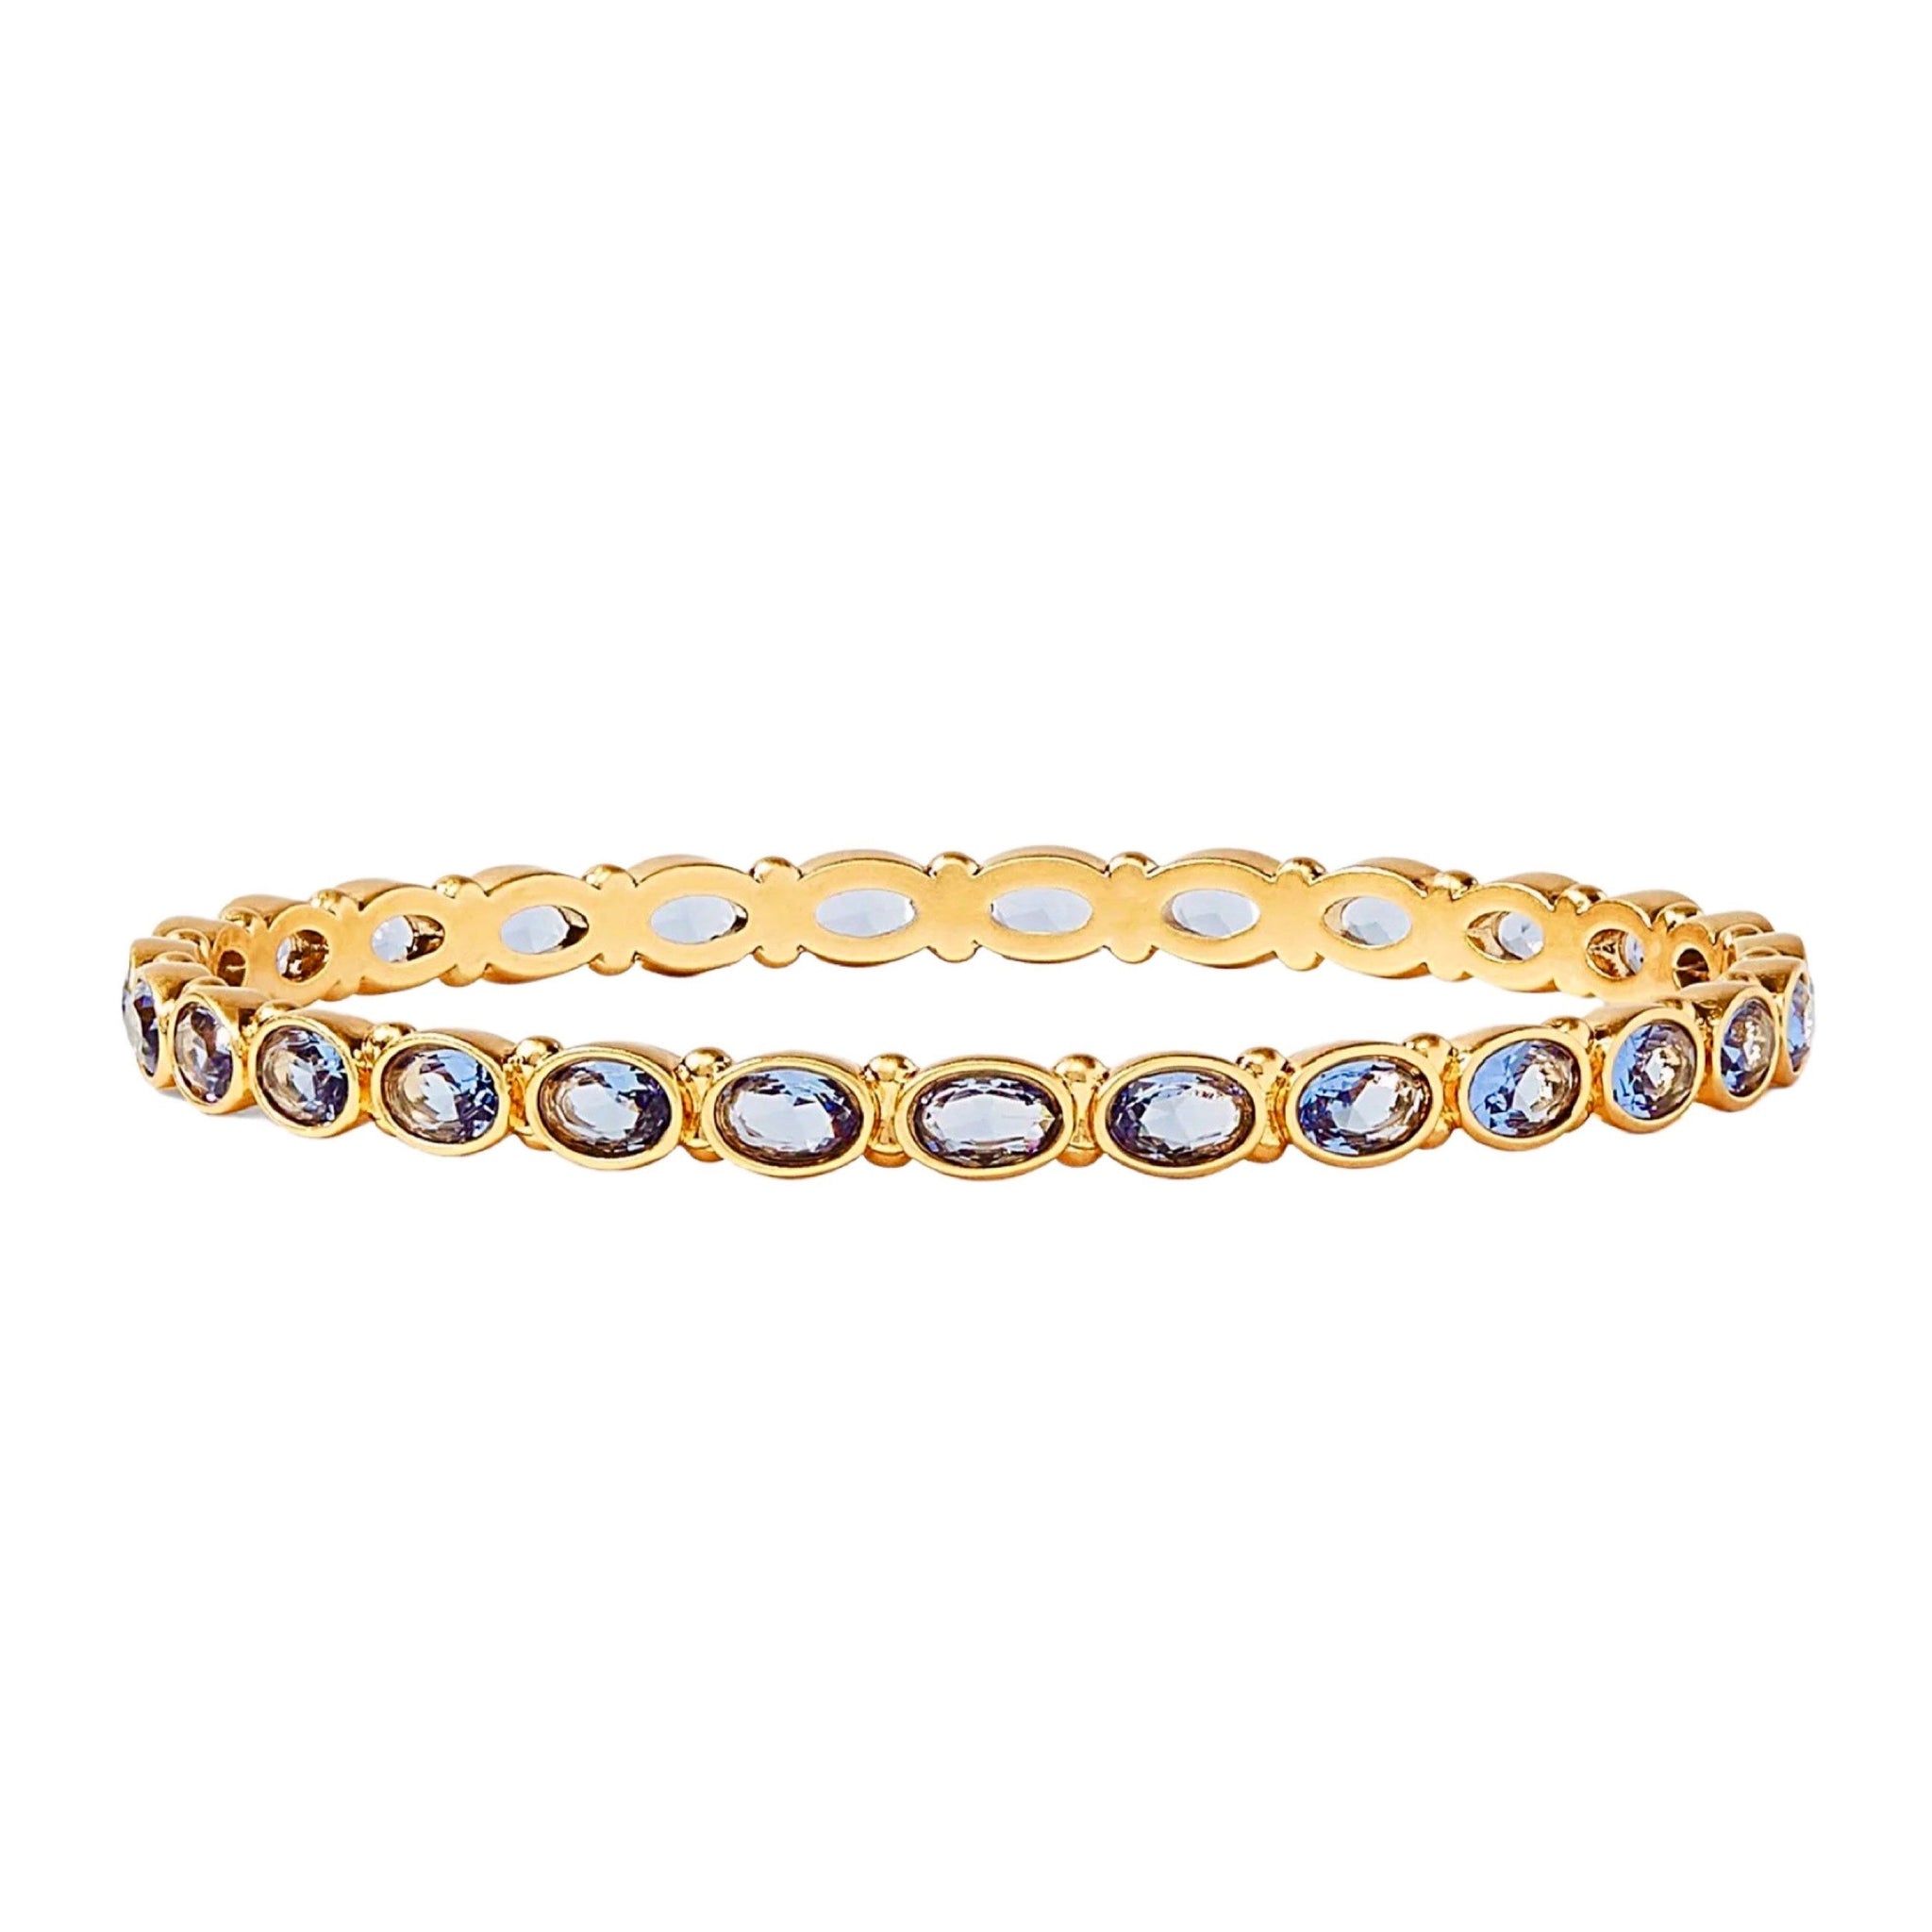 Julie Vos Mykonos Bangle Bracelet is Available at Shaylula Jewlery & Gifts in Tarrytown, NY and onlineThe Julie Vos Mykonos Bangle Bracelet features luxurious oval gemstones in a 24k gilded surround. • 24K gold plate, charcoal blue • 7.5" circumference